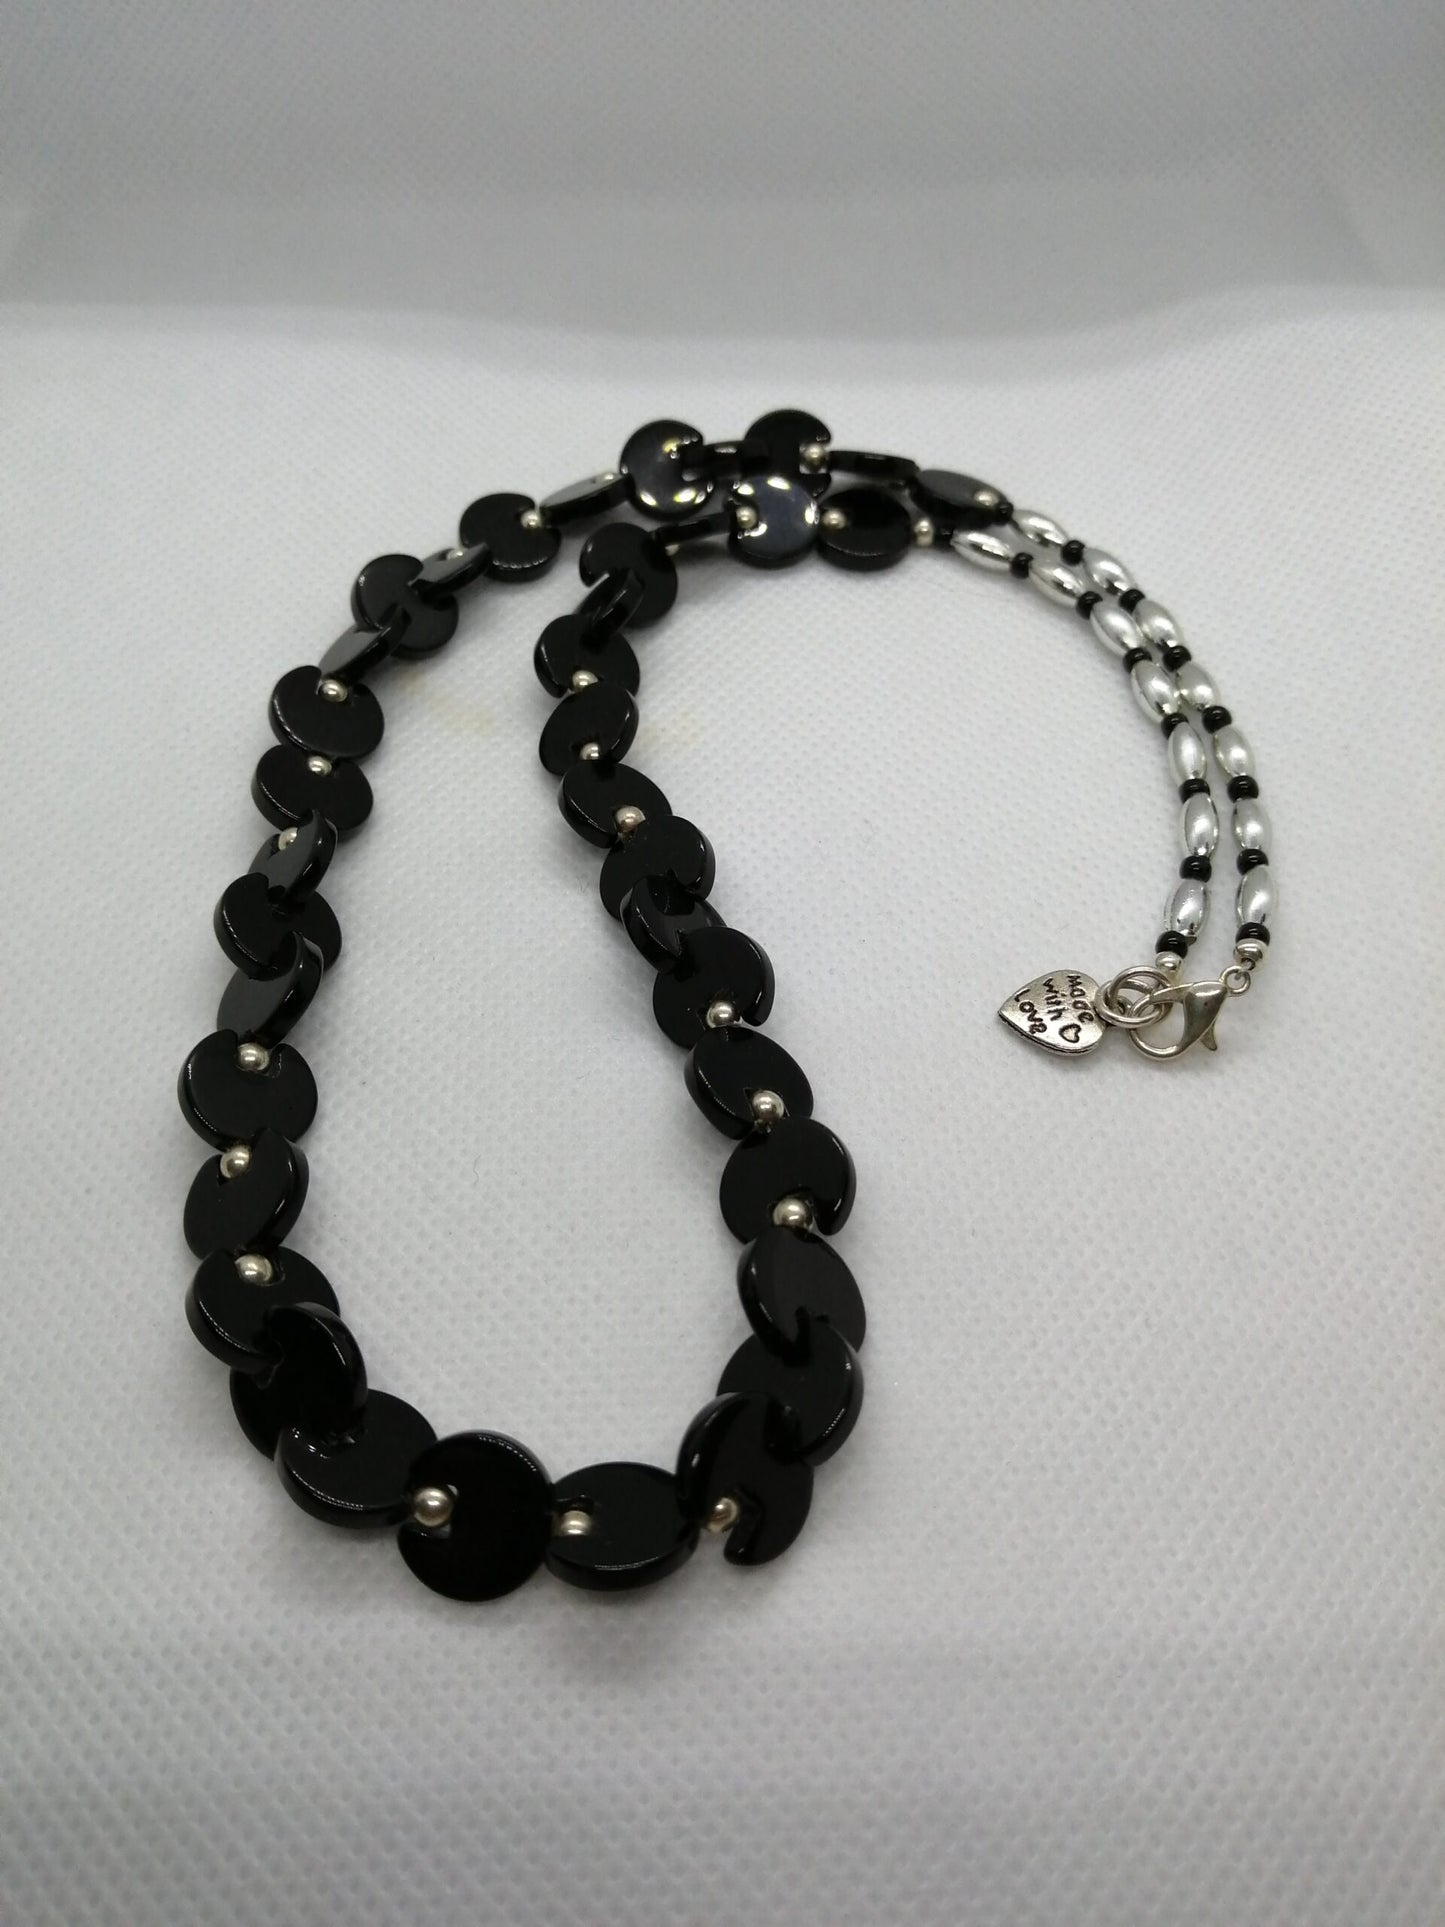 BLACK PACMAN STYLE NECKLACE